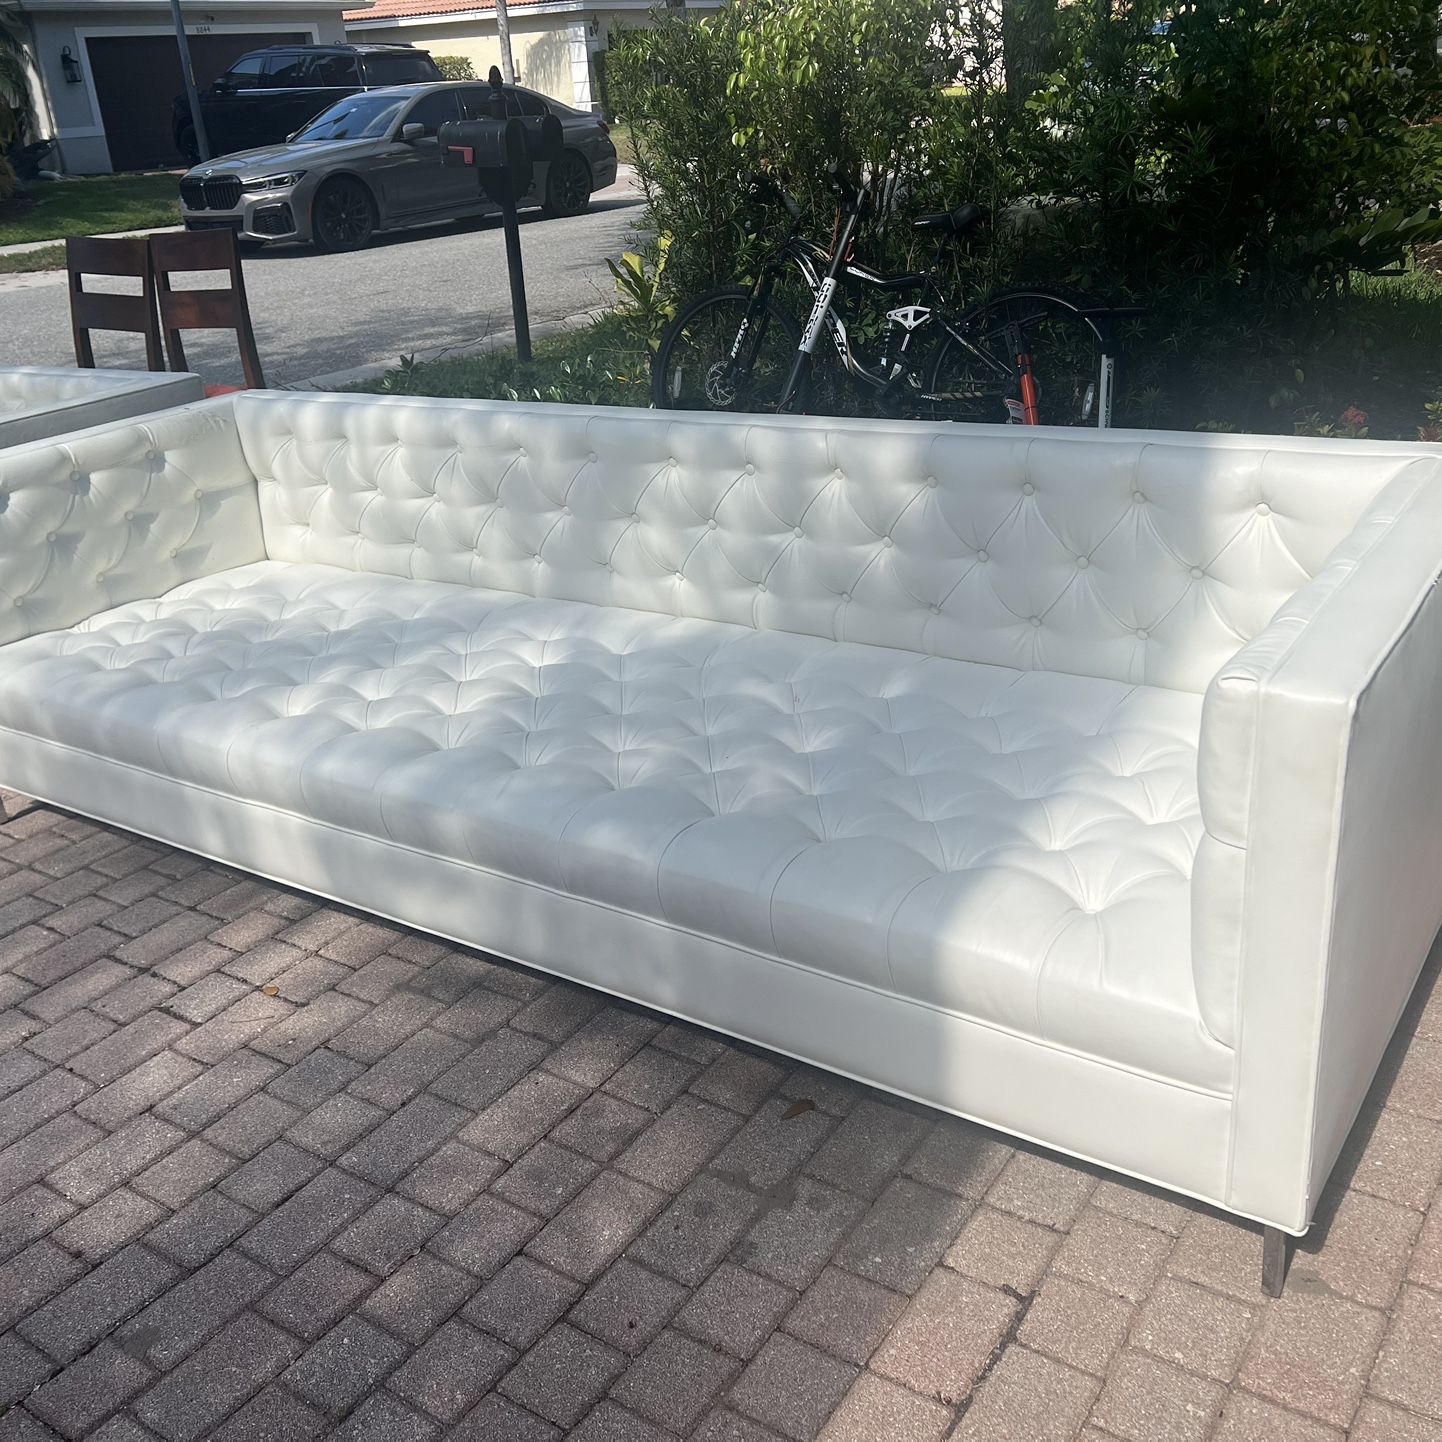 LIVING SET Italian Sofa And Loveseat White Faux Leather With 2 Tables And 1 Seat MODANI 